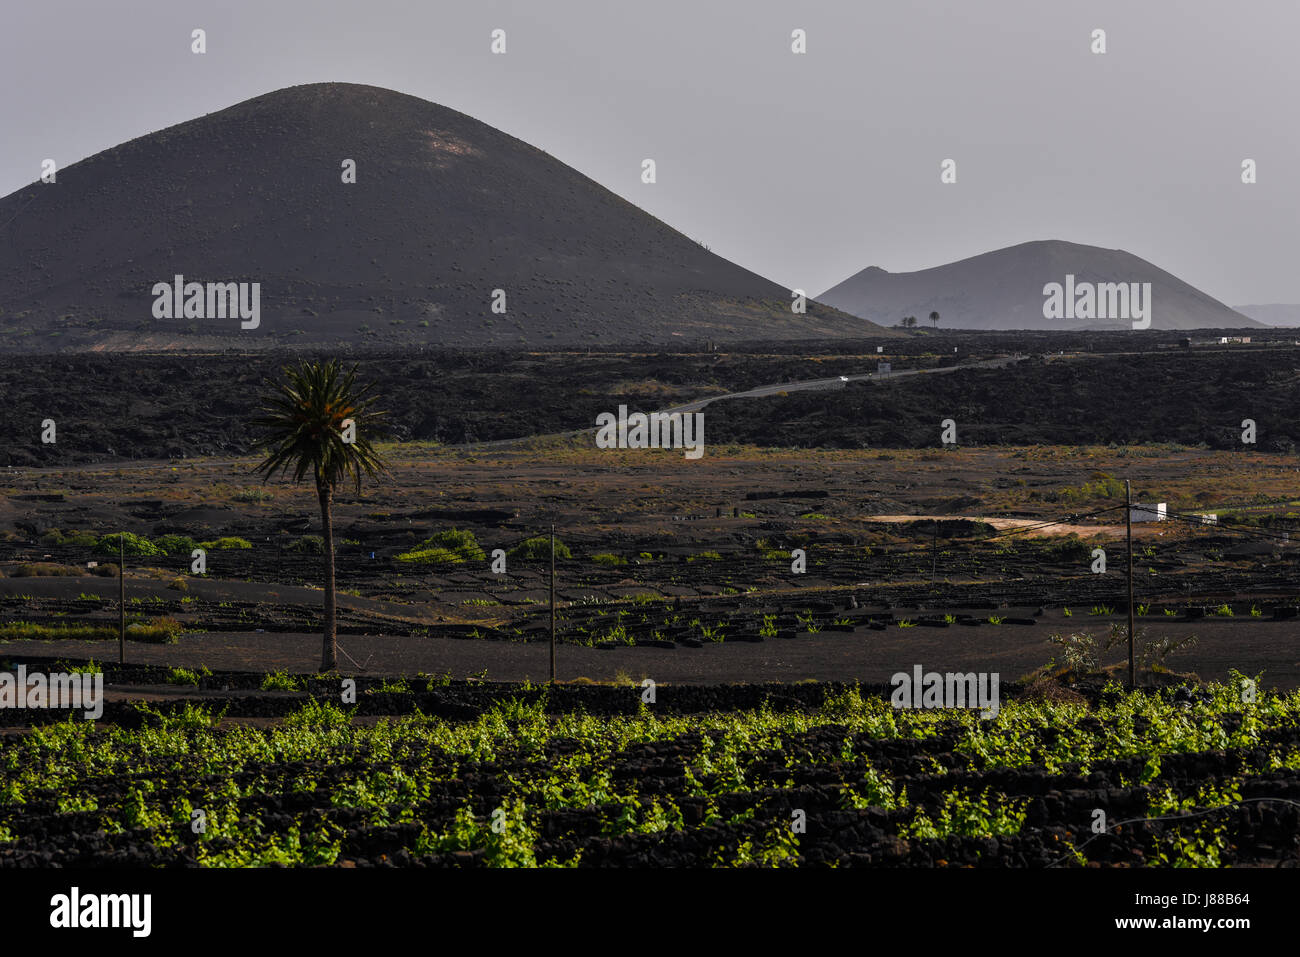 Black vineyards with a mountain in the background. La Geria, growing vine in lava, Lanzarote, Spain Stock Photo